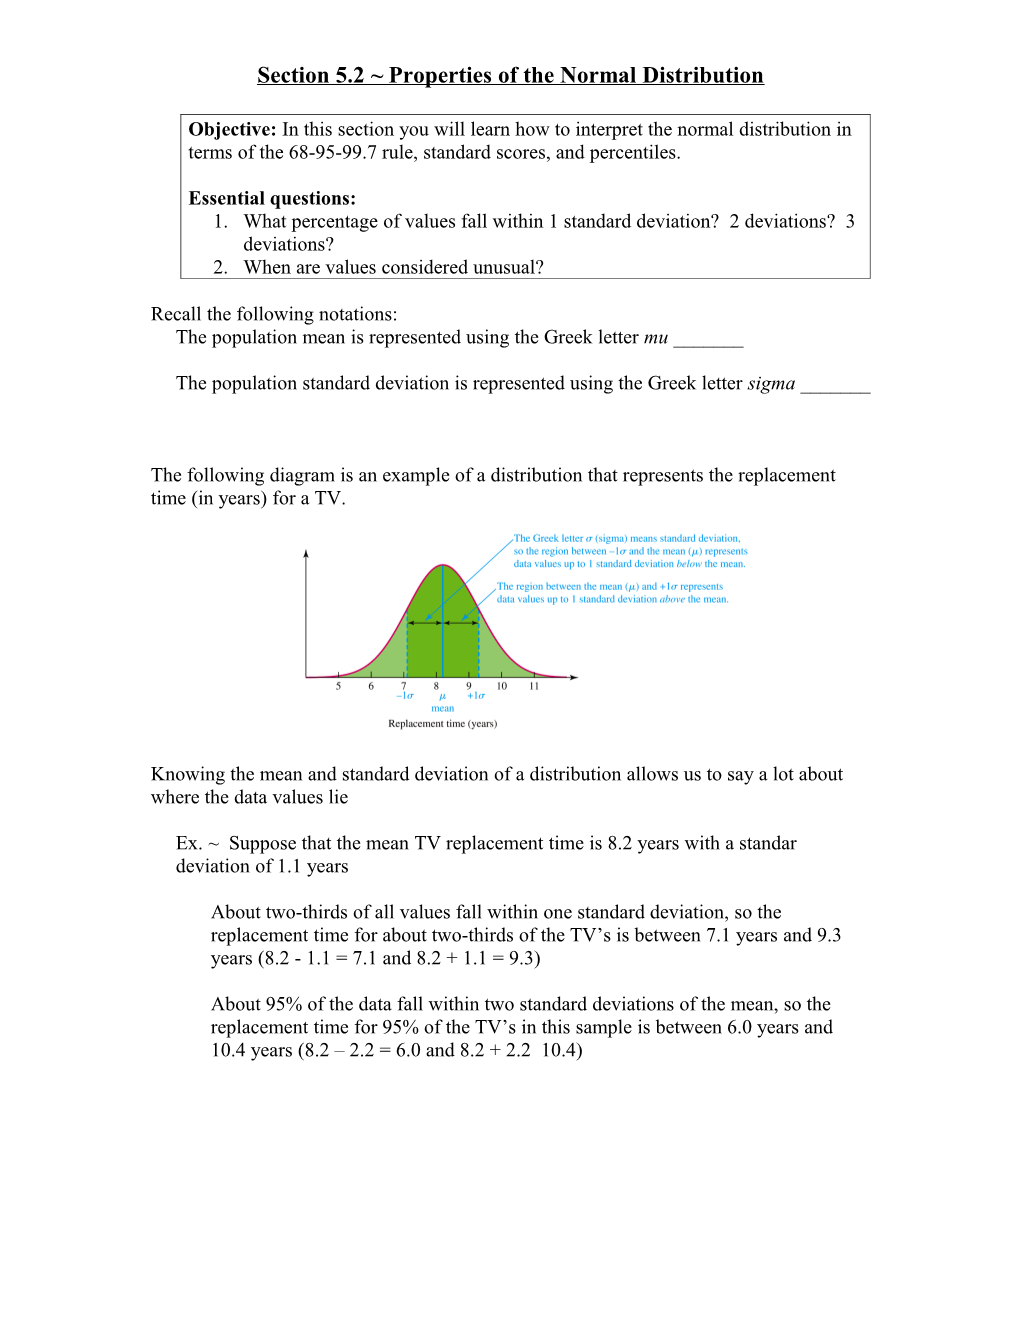 Section 5.2 Properties of the Normal Distribution